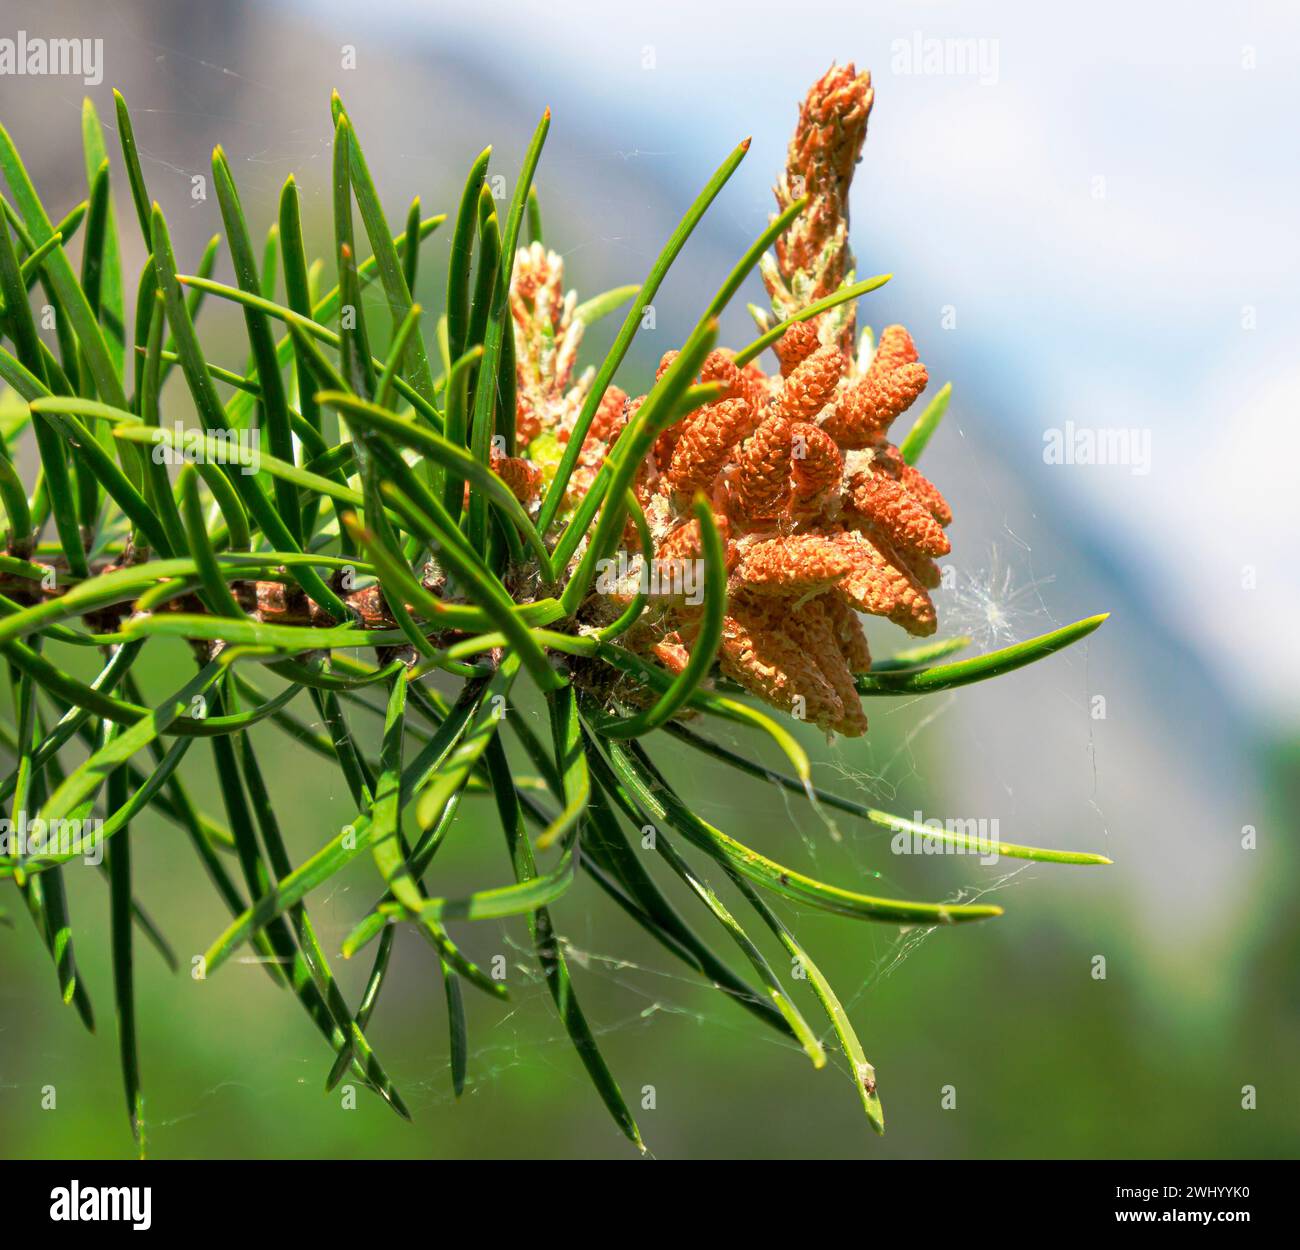 Scots pine with cones, Falzthurntal, Tyrol, Austria Stock Photo